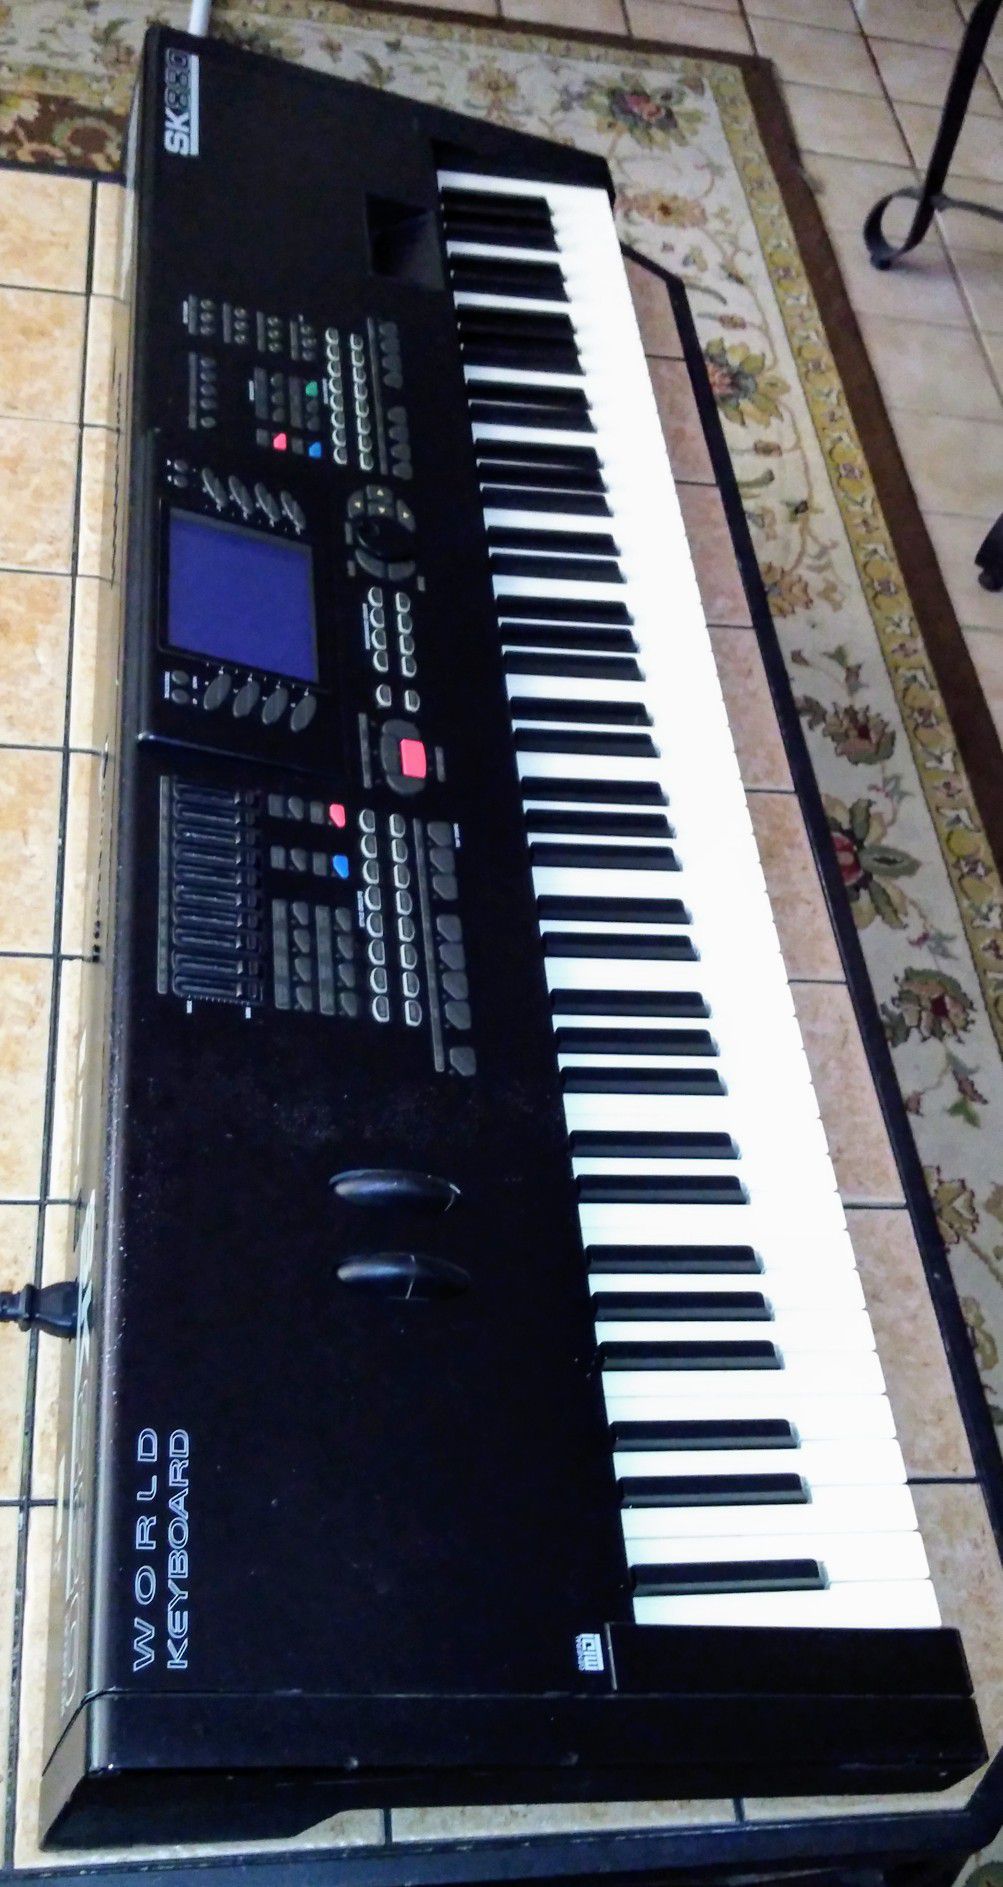 General Music SK 880 World Synthesizer keyboard way Huge and Heavy with 88 weighted keys